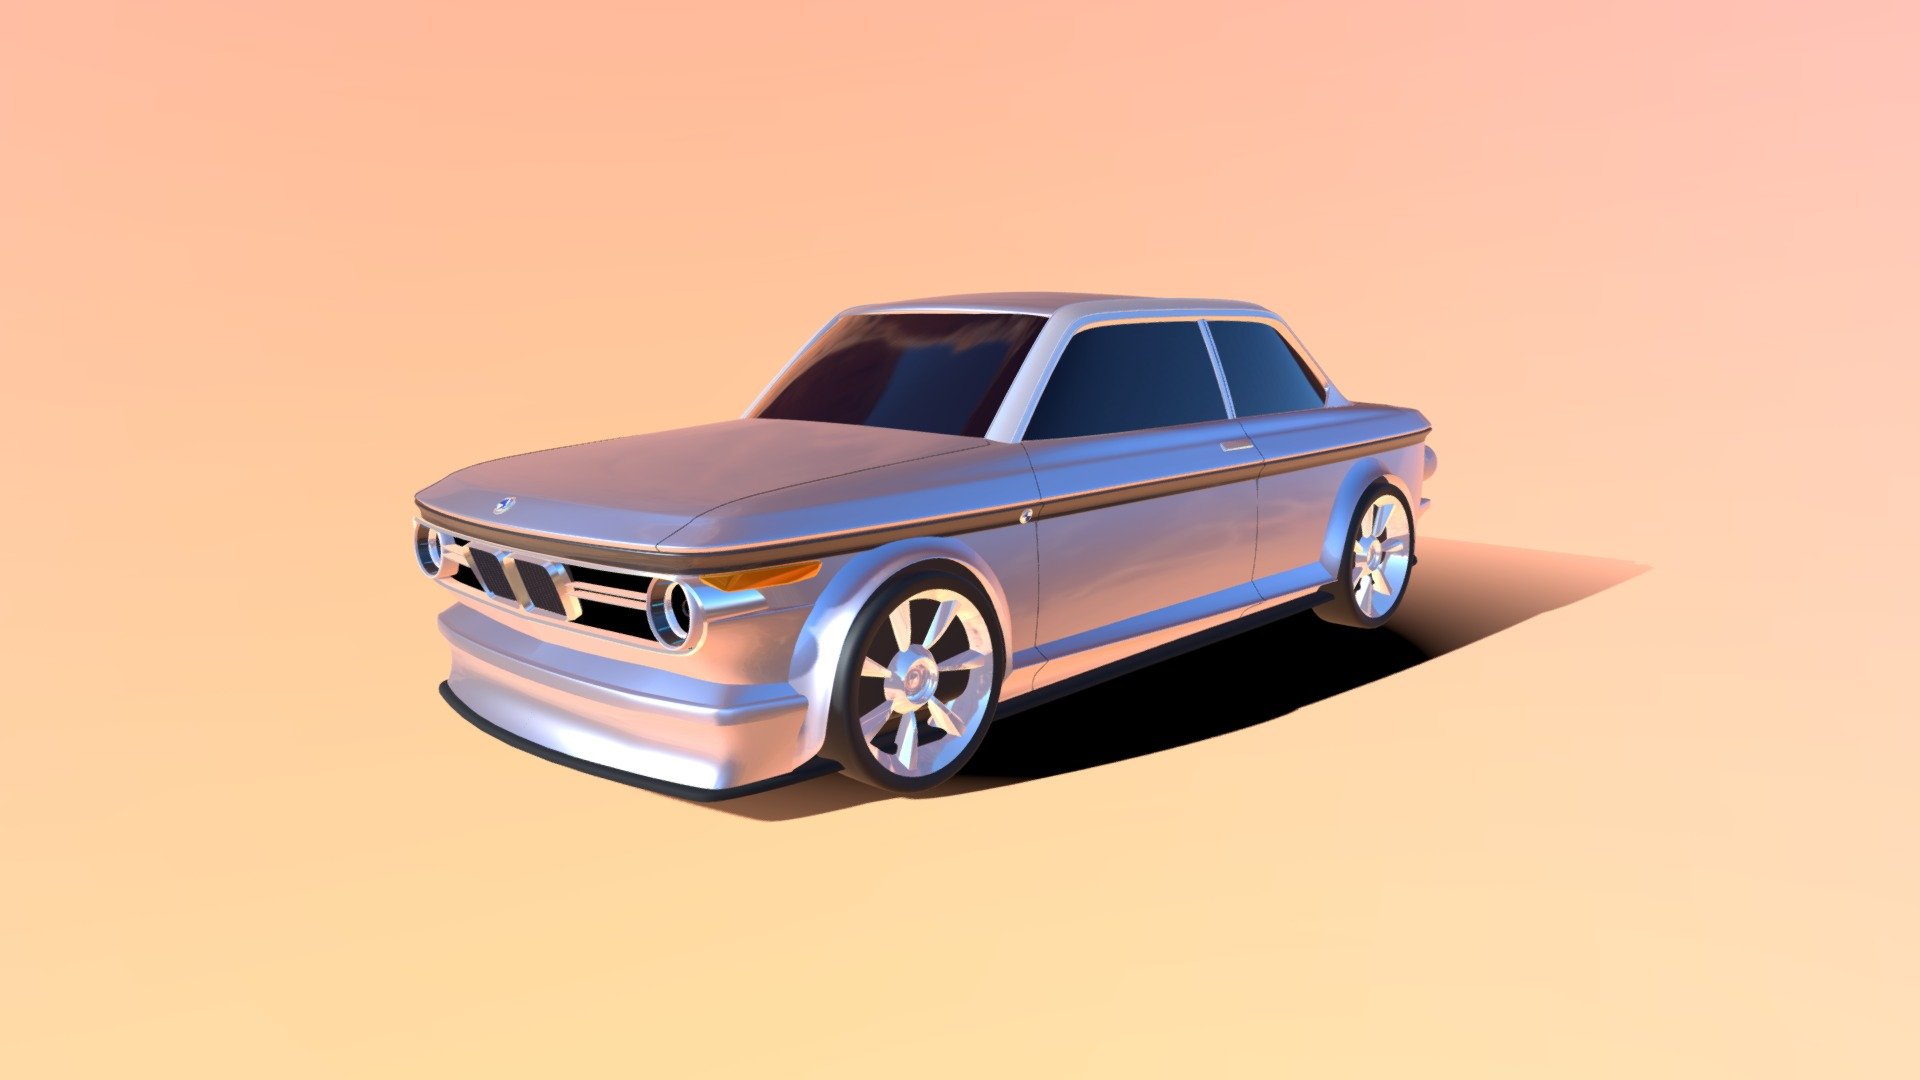 A re-make of the classic BMW 2002, this future version is an electric, semi-autonomous vehicle.  The &ldquo;waterline